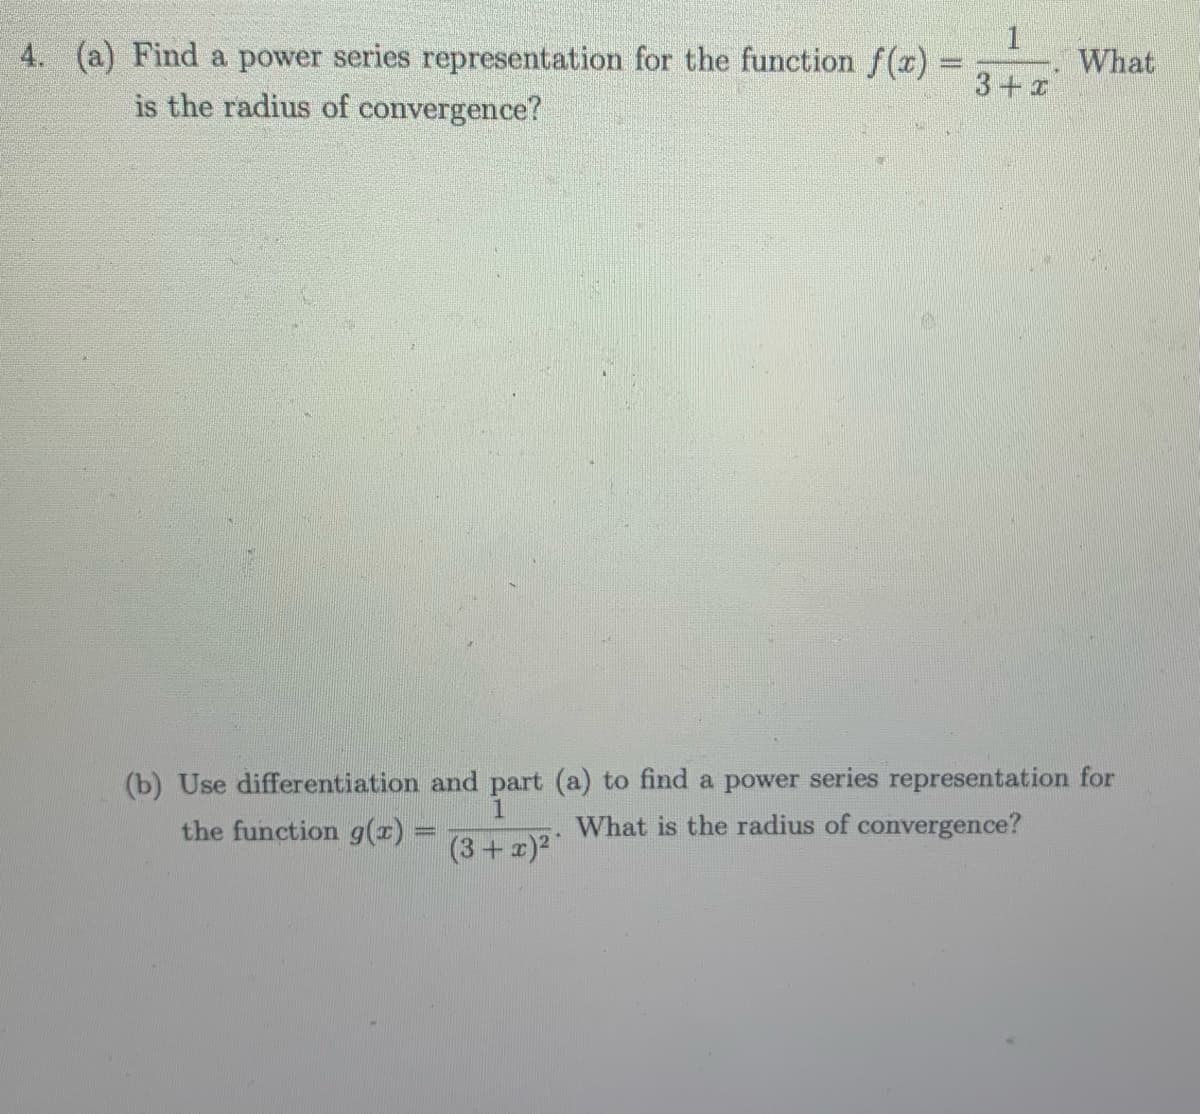 4. (a) Find a power series representation for the function f(x) =
is the radius of convergence?
1
3+x
What
(b) Use differentiation and part (a) to find a power series representation for
1
the function g(x)
What is the radius of convergence?
(3 + x)²